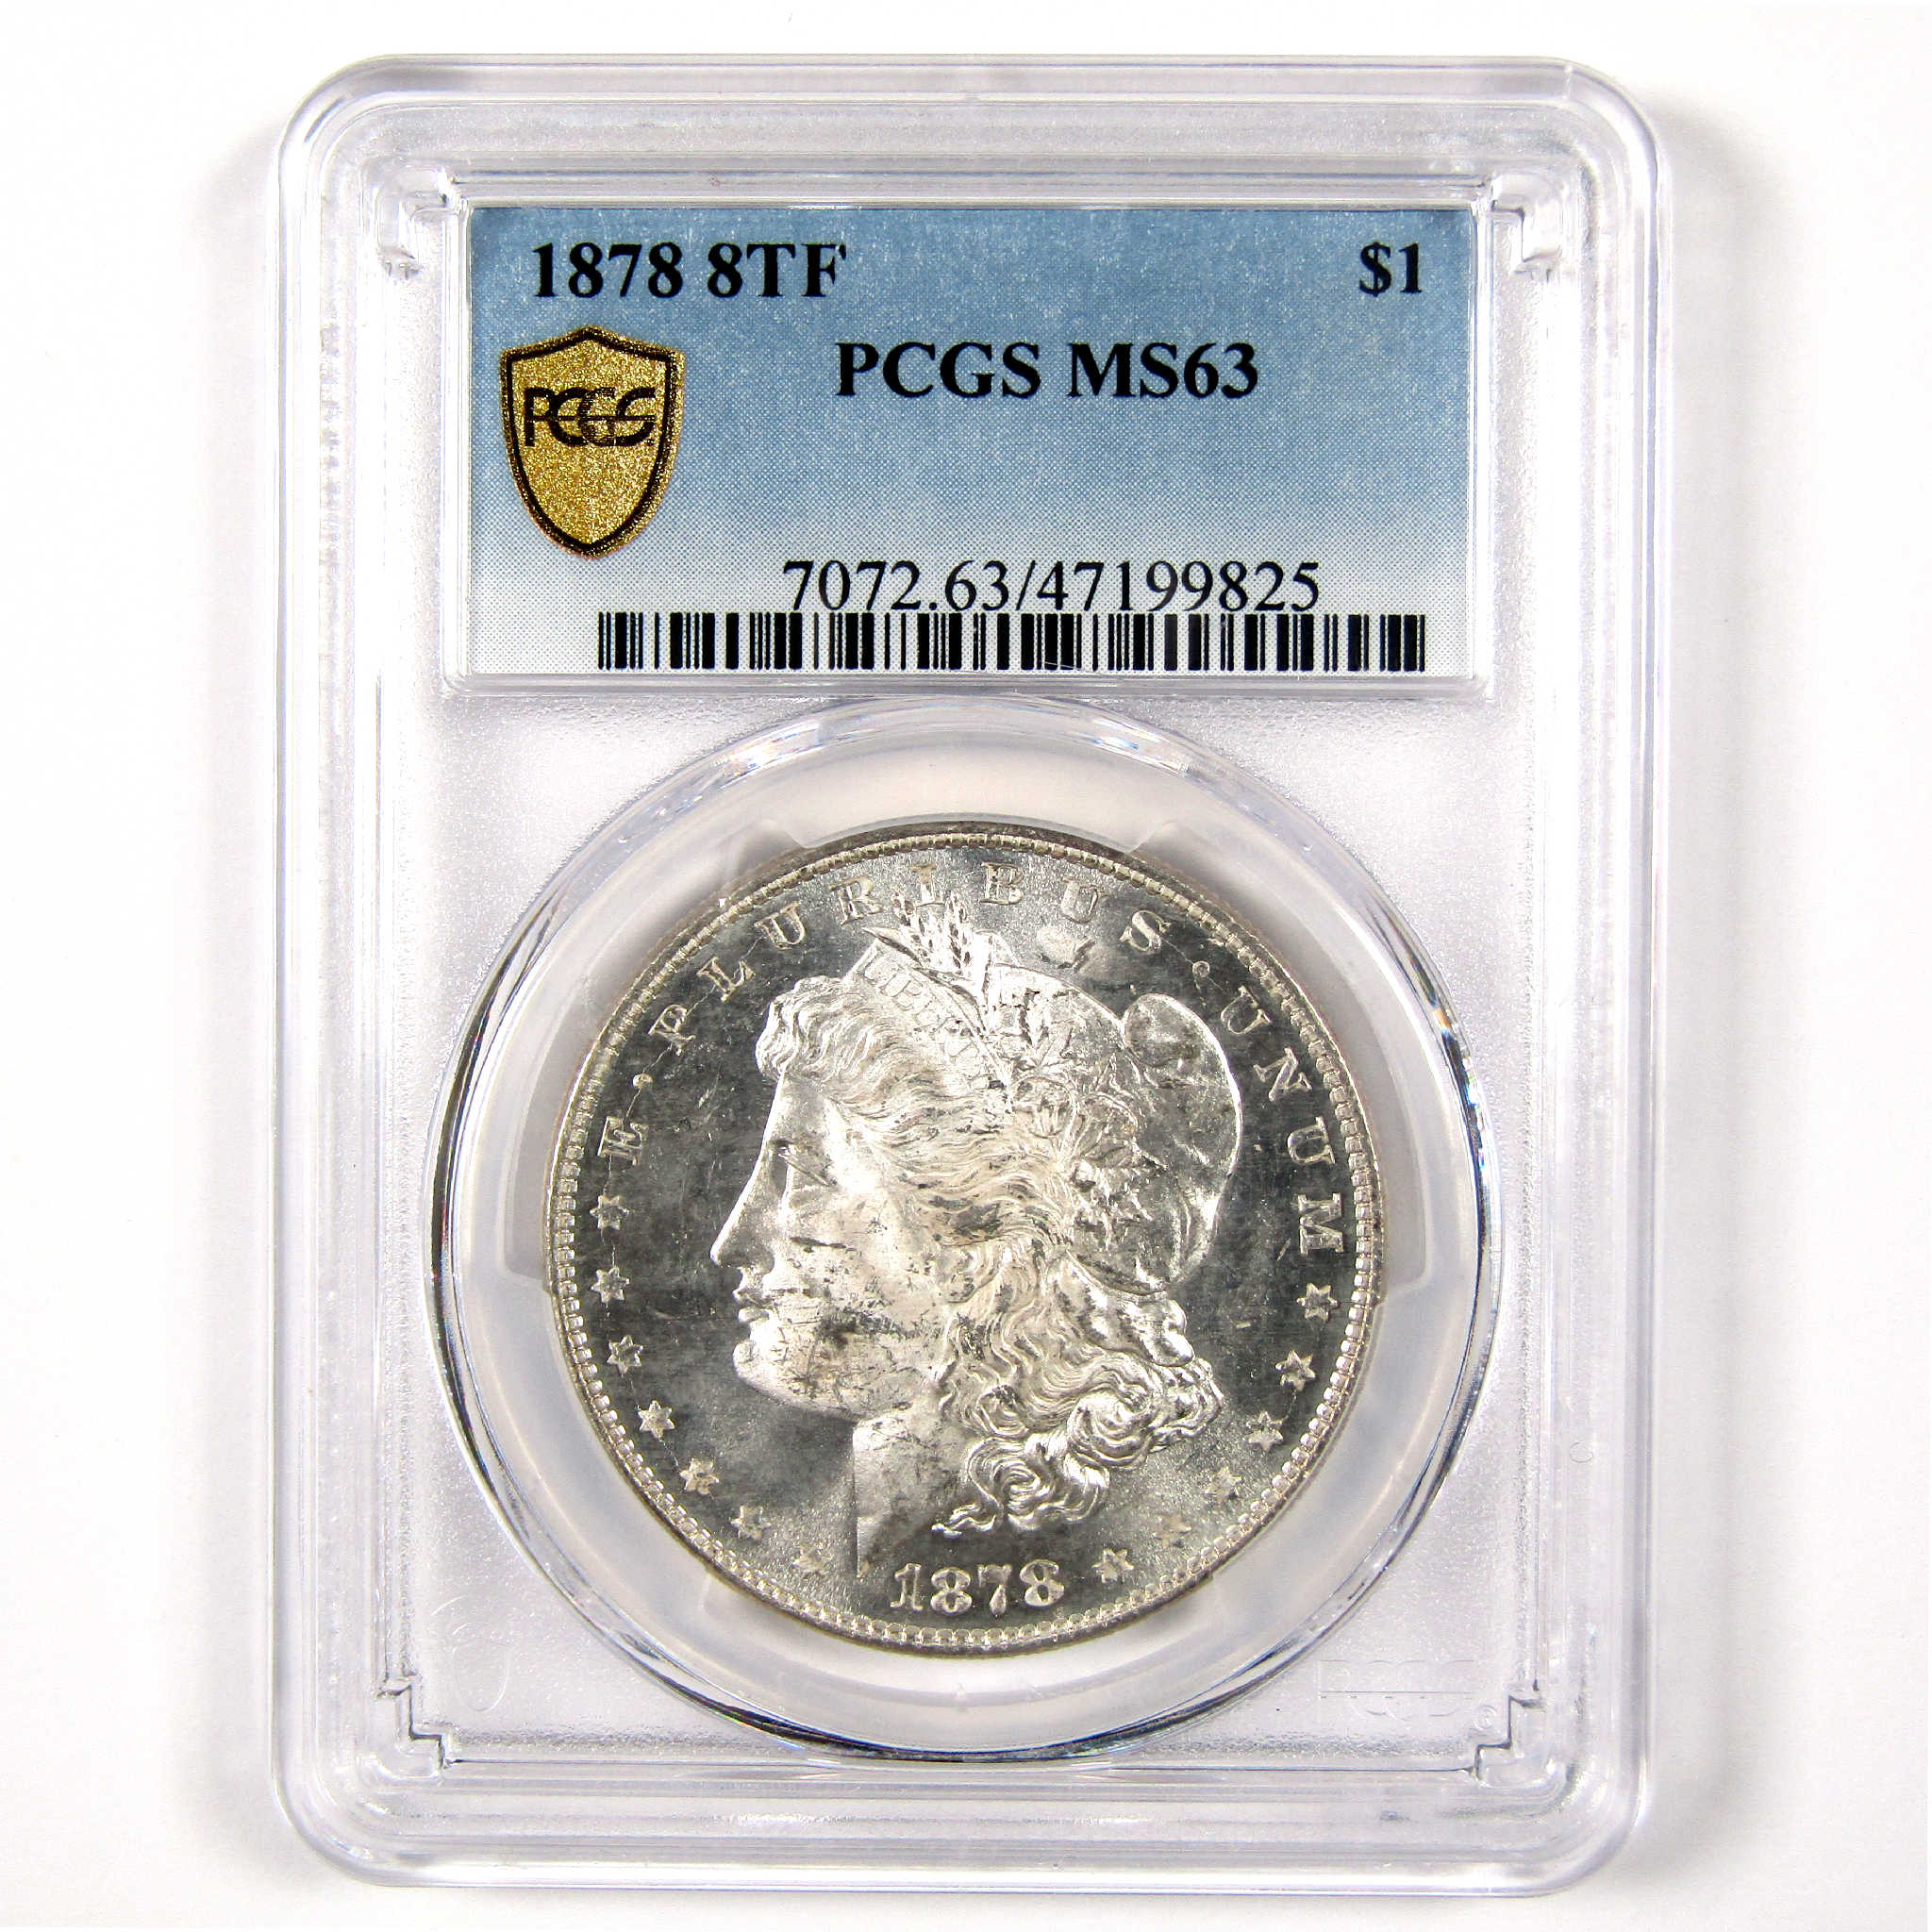 1878 8TF Morgan Dollar MS 63 PCGS Silver $1 Uncirculated SKU:I11319 - Morgan coin - Morgan silver dollar - Morgan silver dollar for sale - Profile Coins &amp; Collectibles